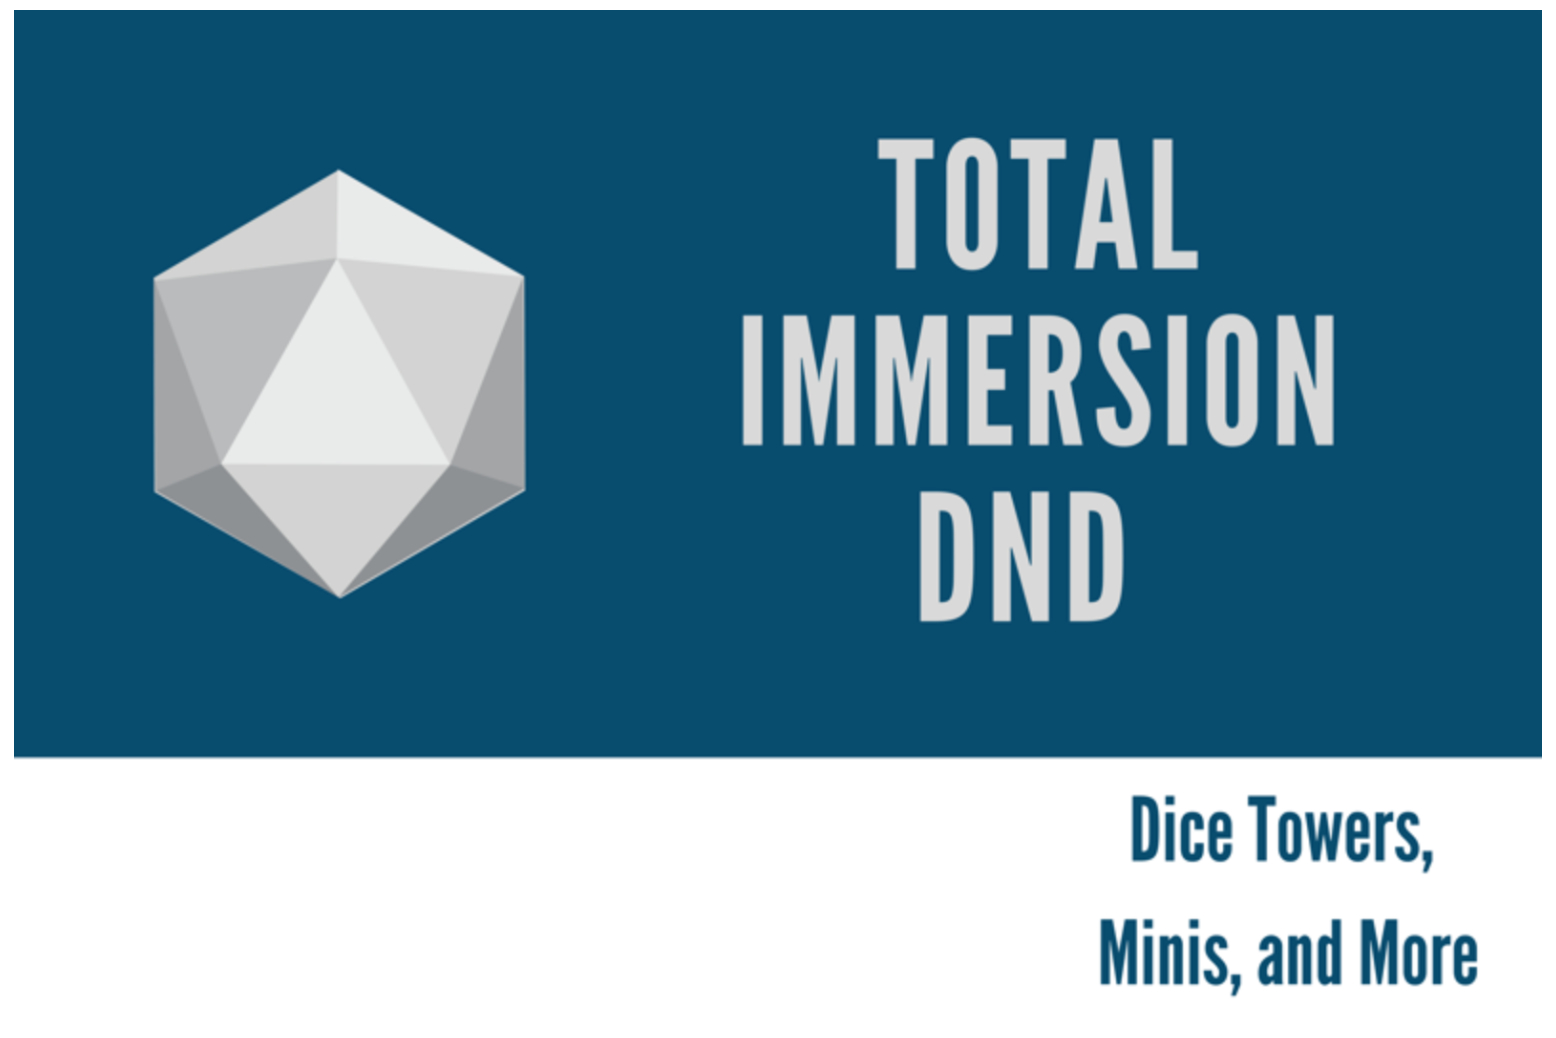 Total Immersion DND Flag